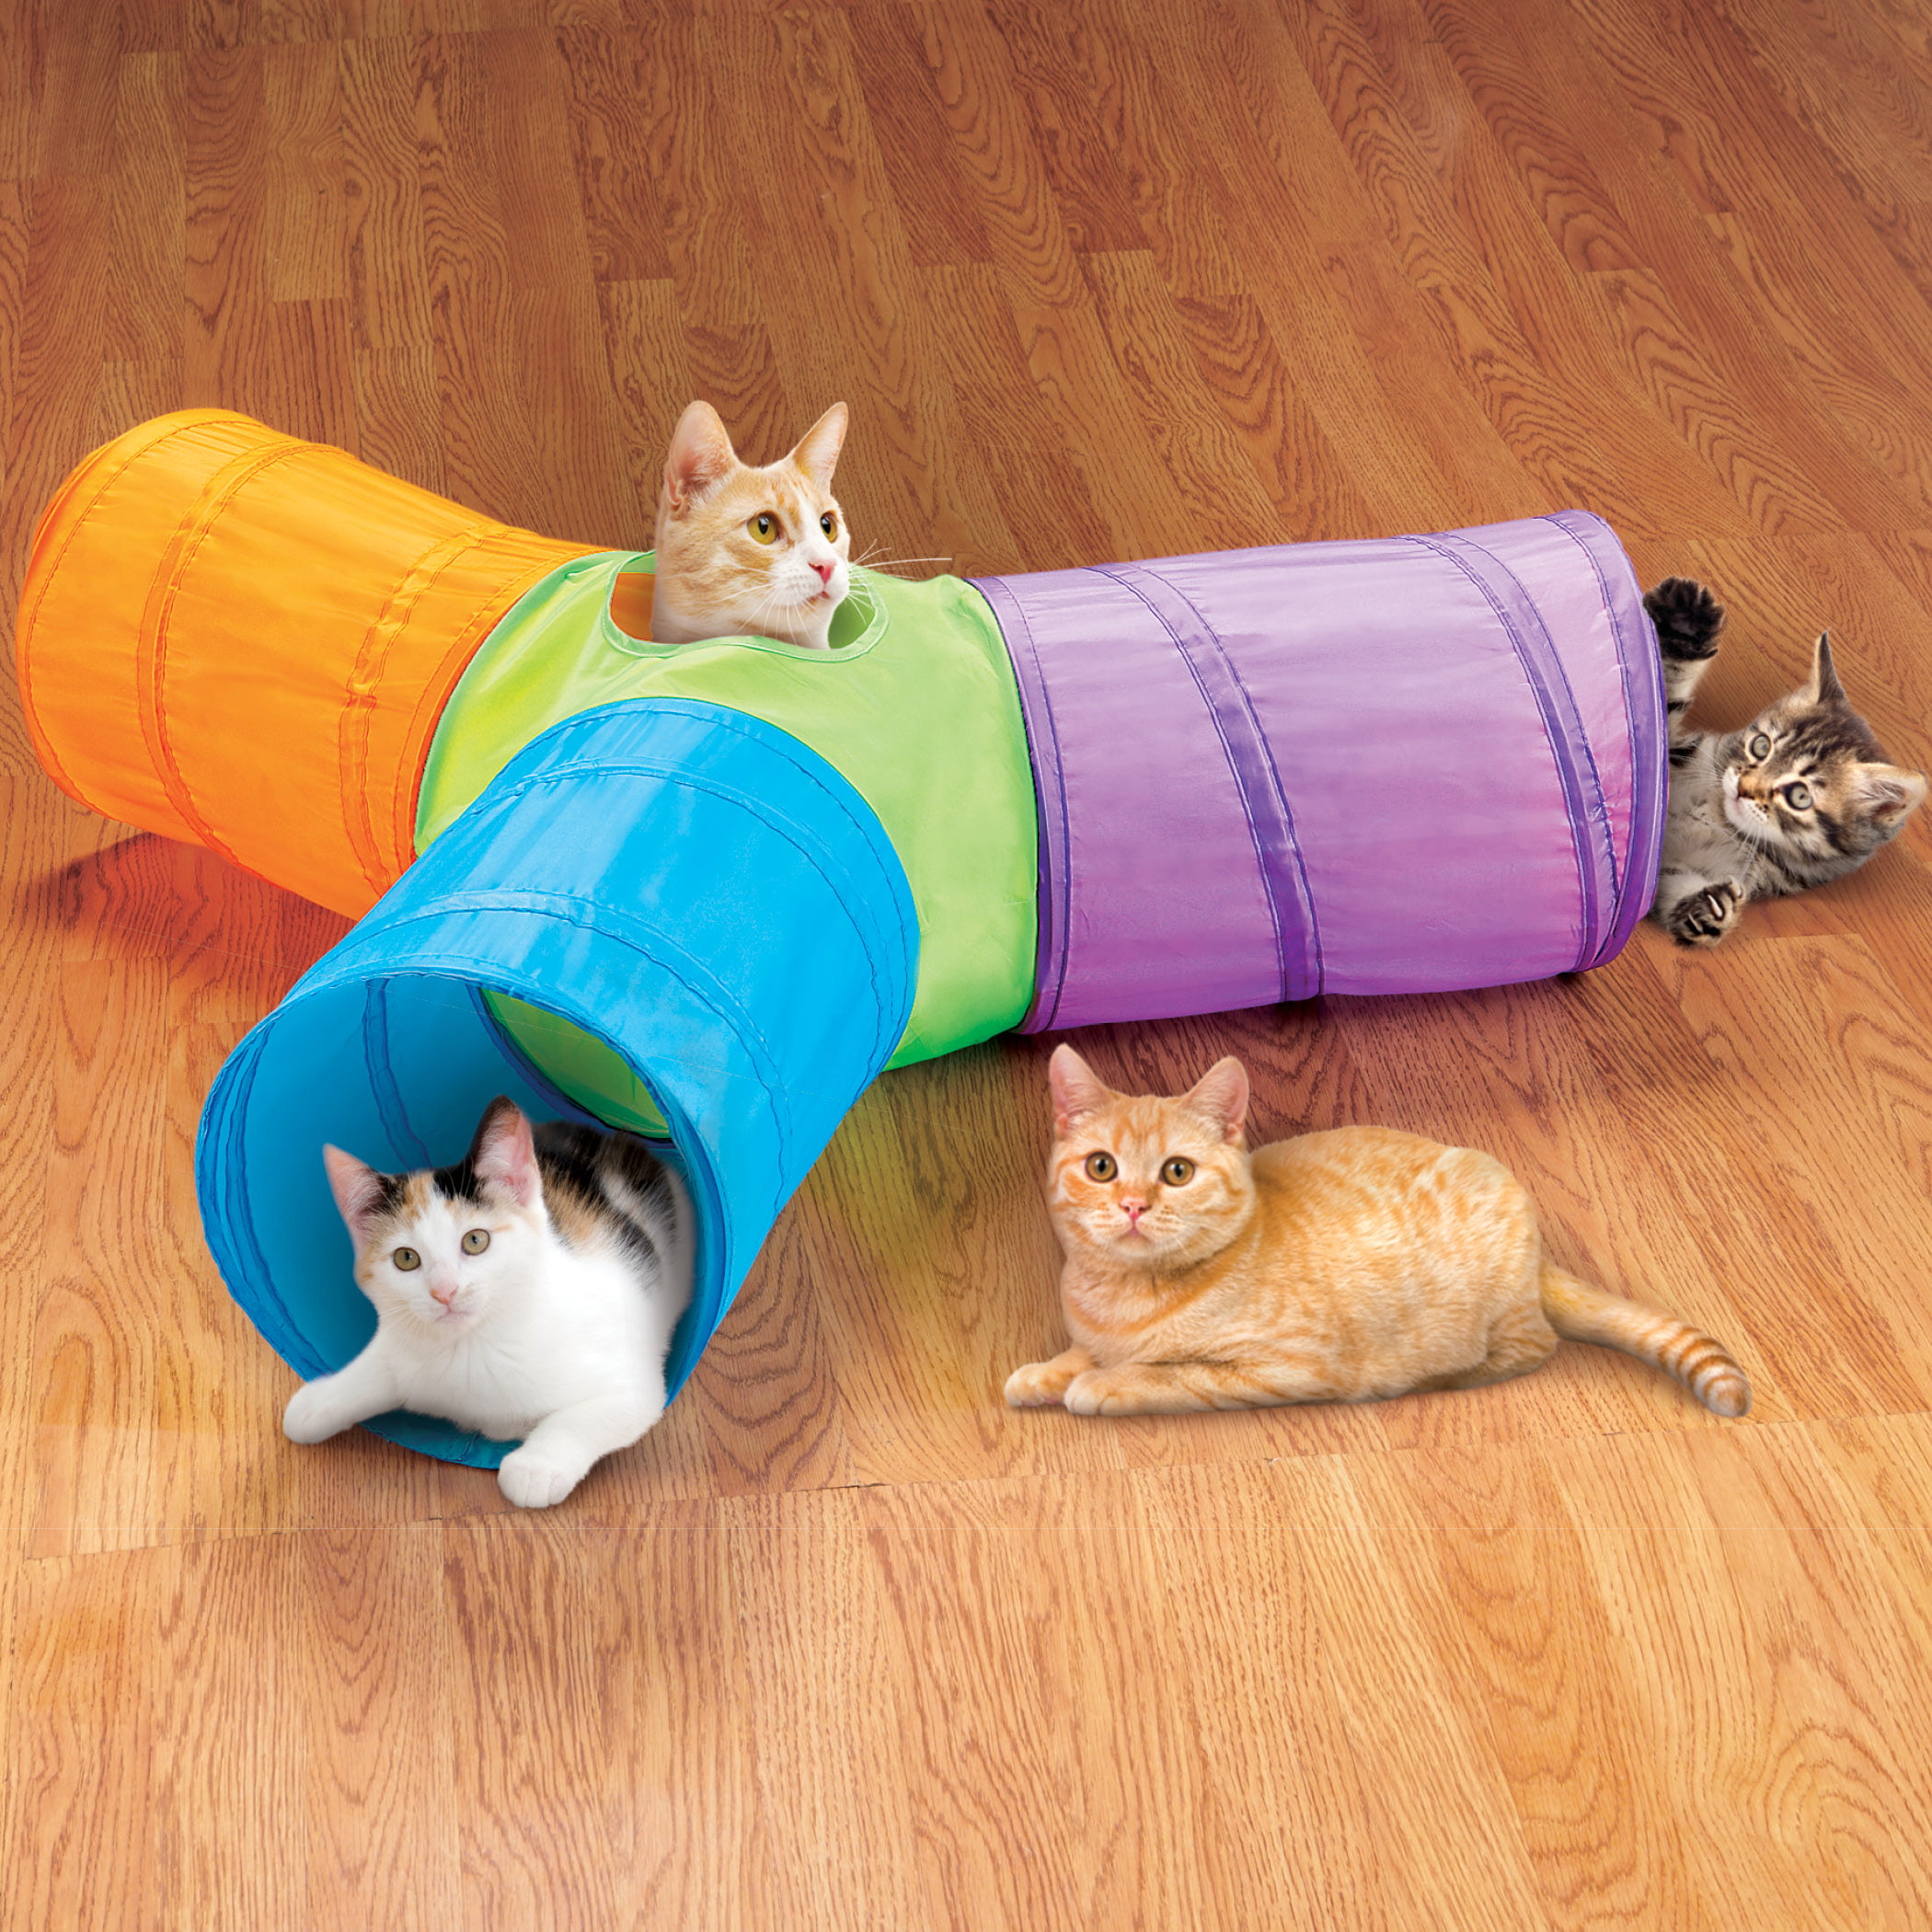 3 Way Pop Up Cat  Tunnel with Hanging Toys  Entertainment 